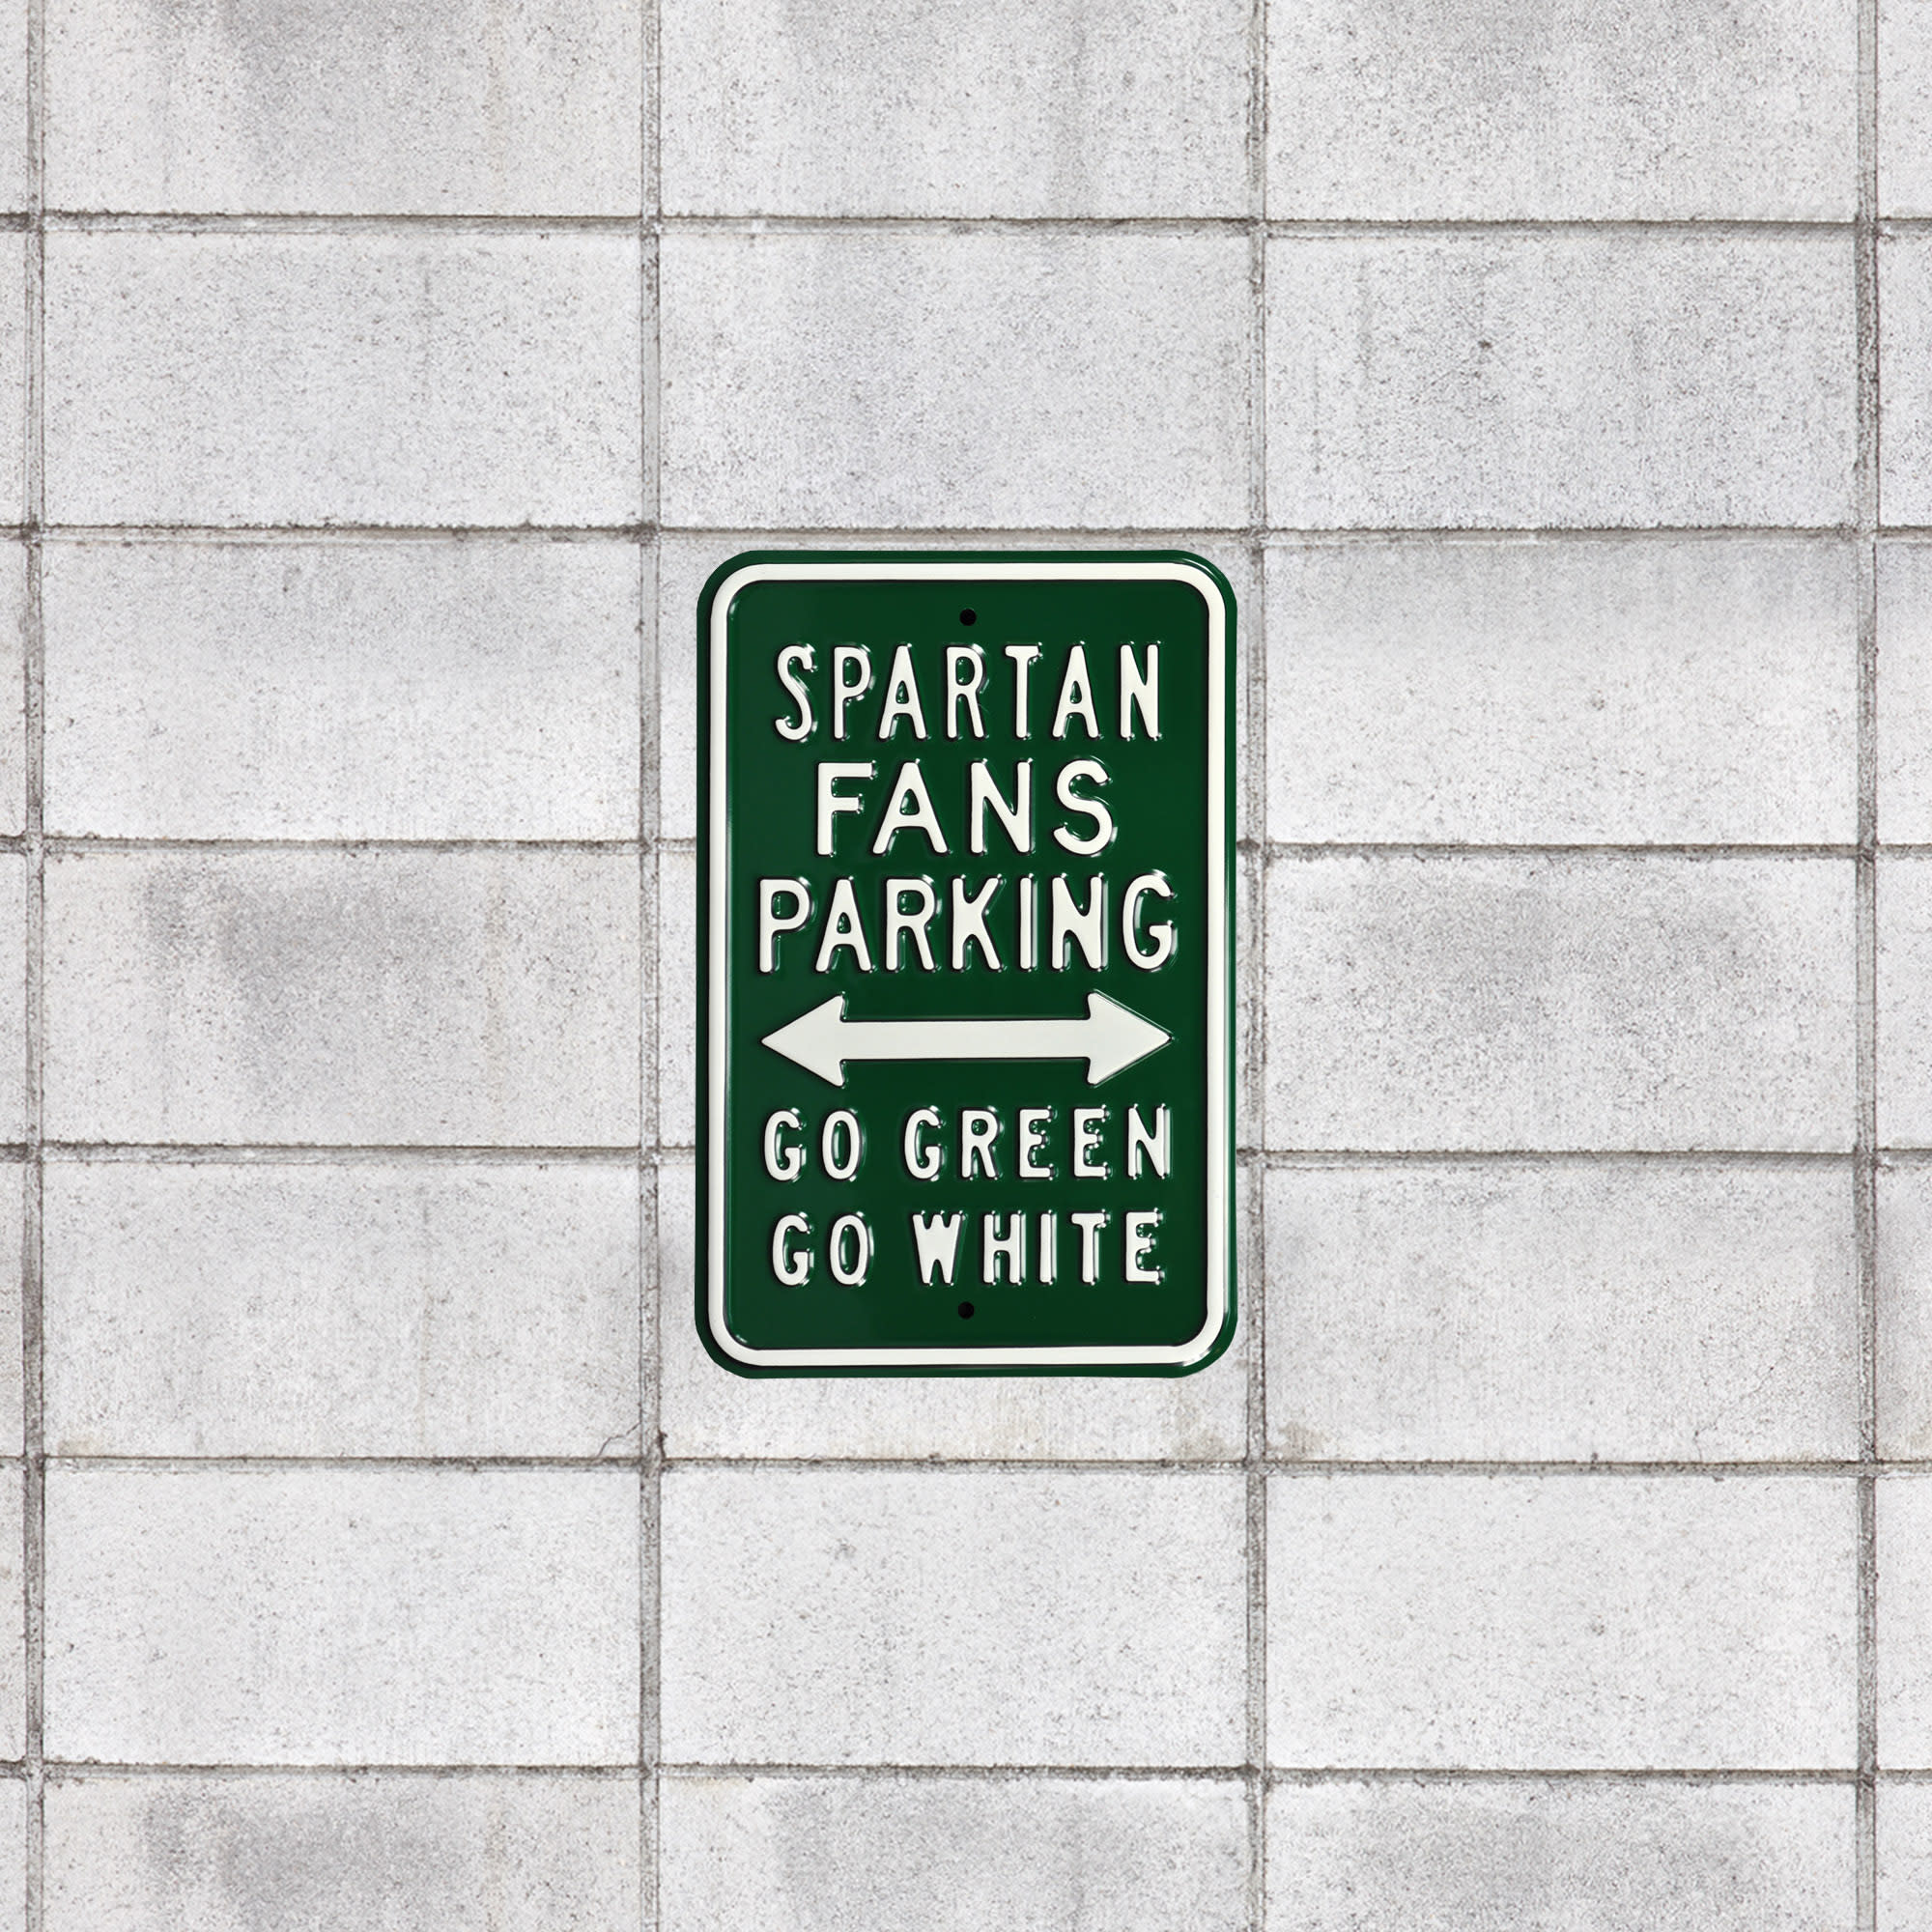 Michigan State Spartans: Go Green, Go White Parking - Officially Licensed Metal Street Sign 18.0"W x 12.0"H by Fathead | 100% St